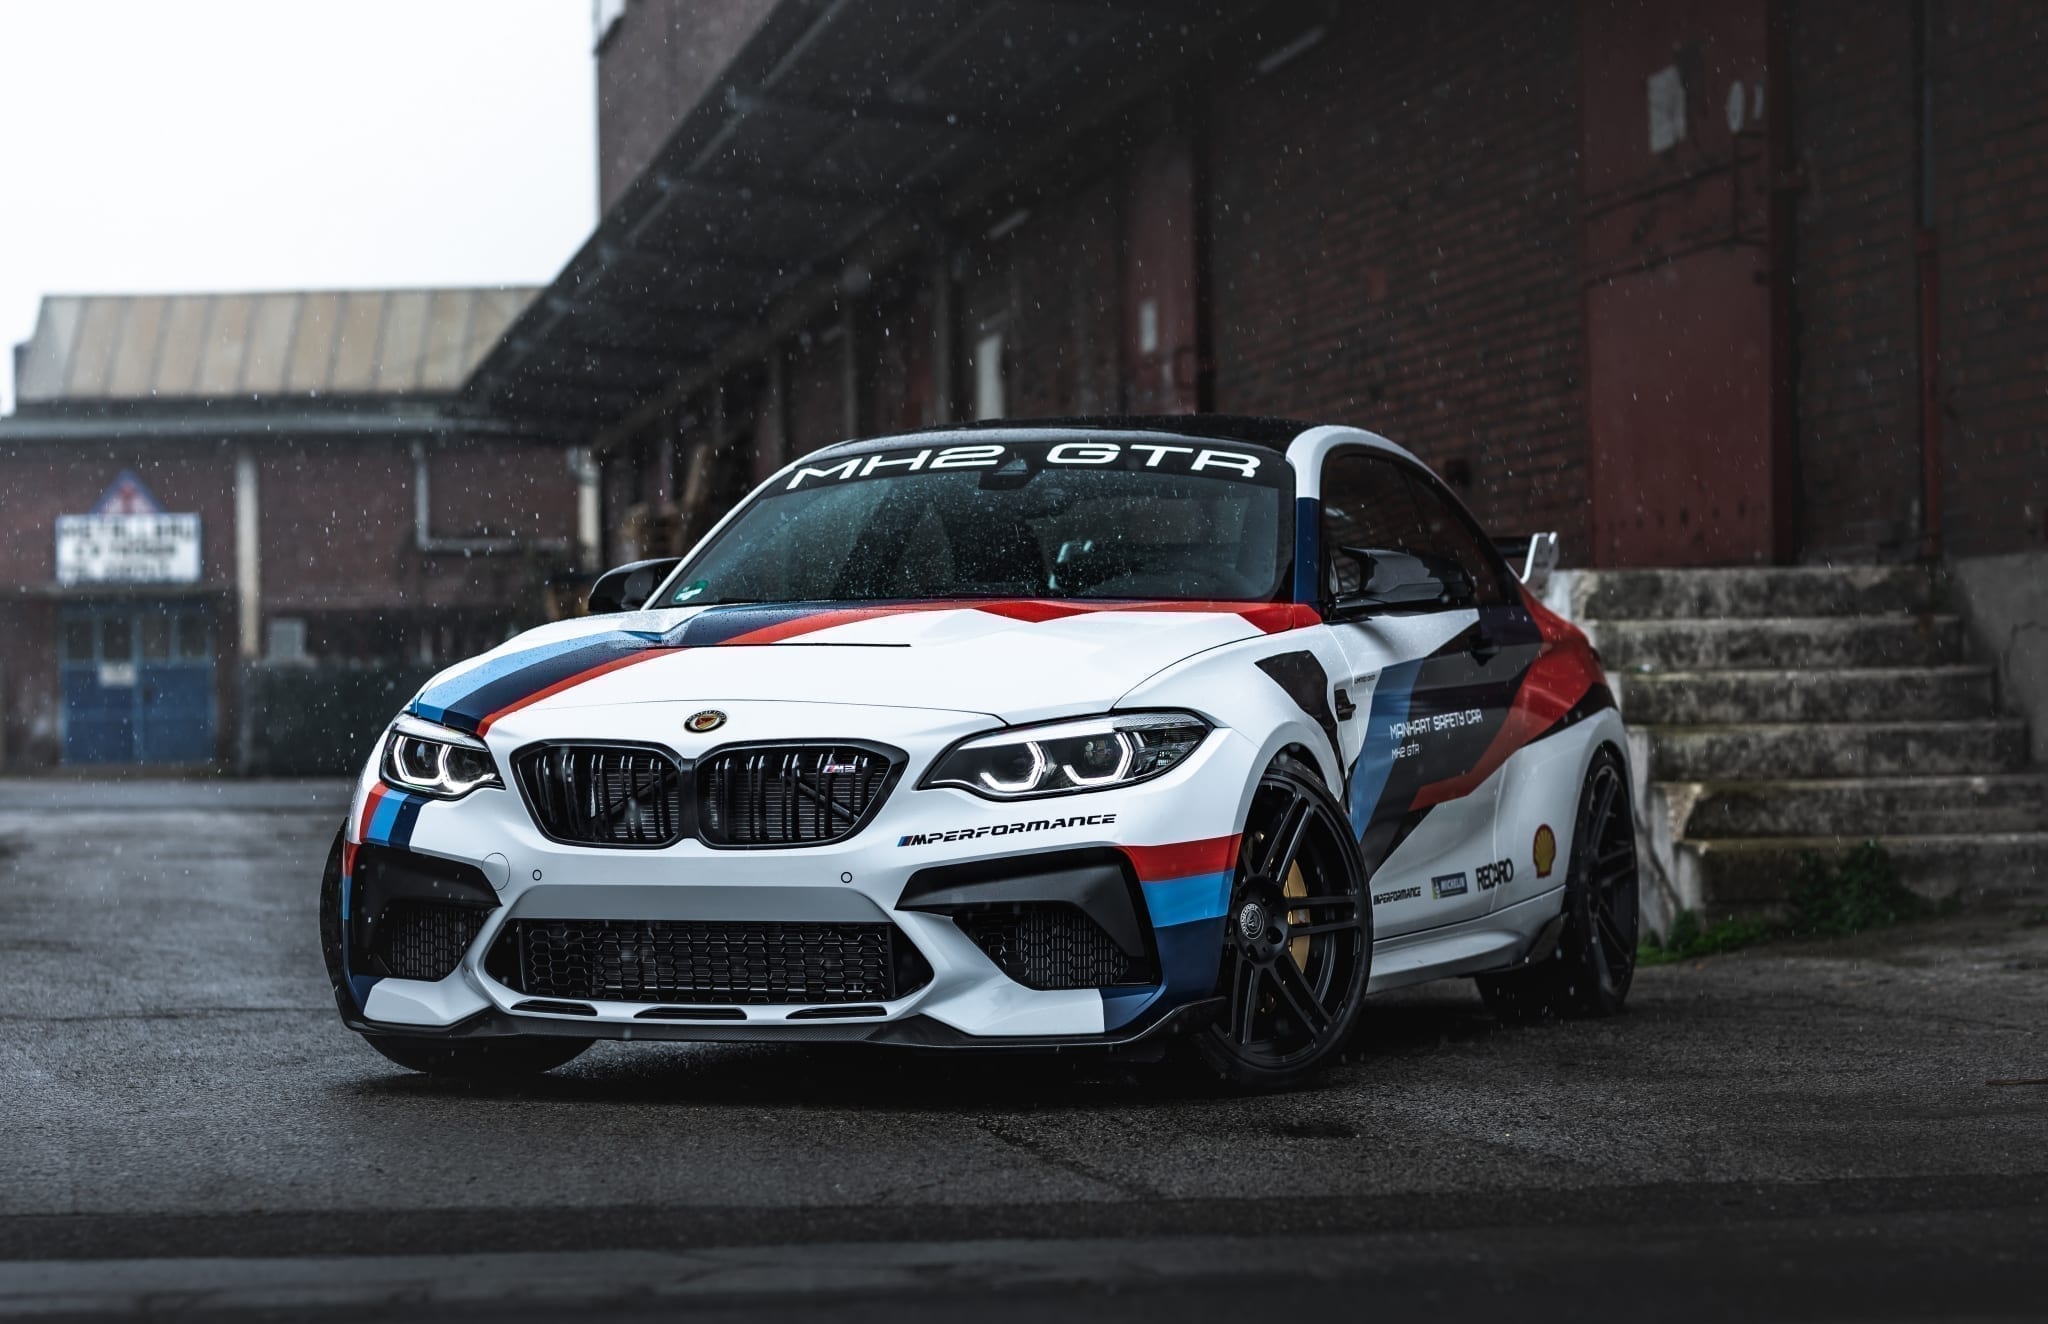 Manhart Body Kit Set For Bmw M2 F87 Cs Buy With Delivery Installation